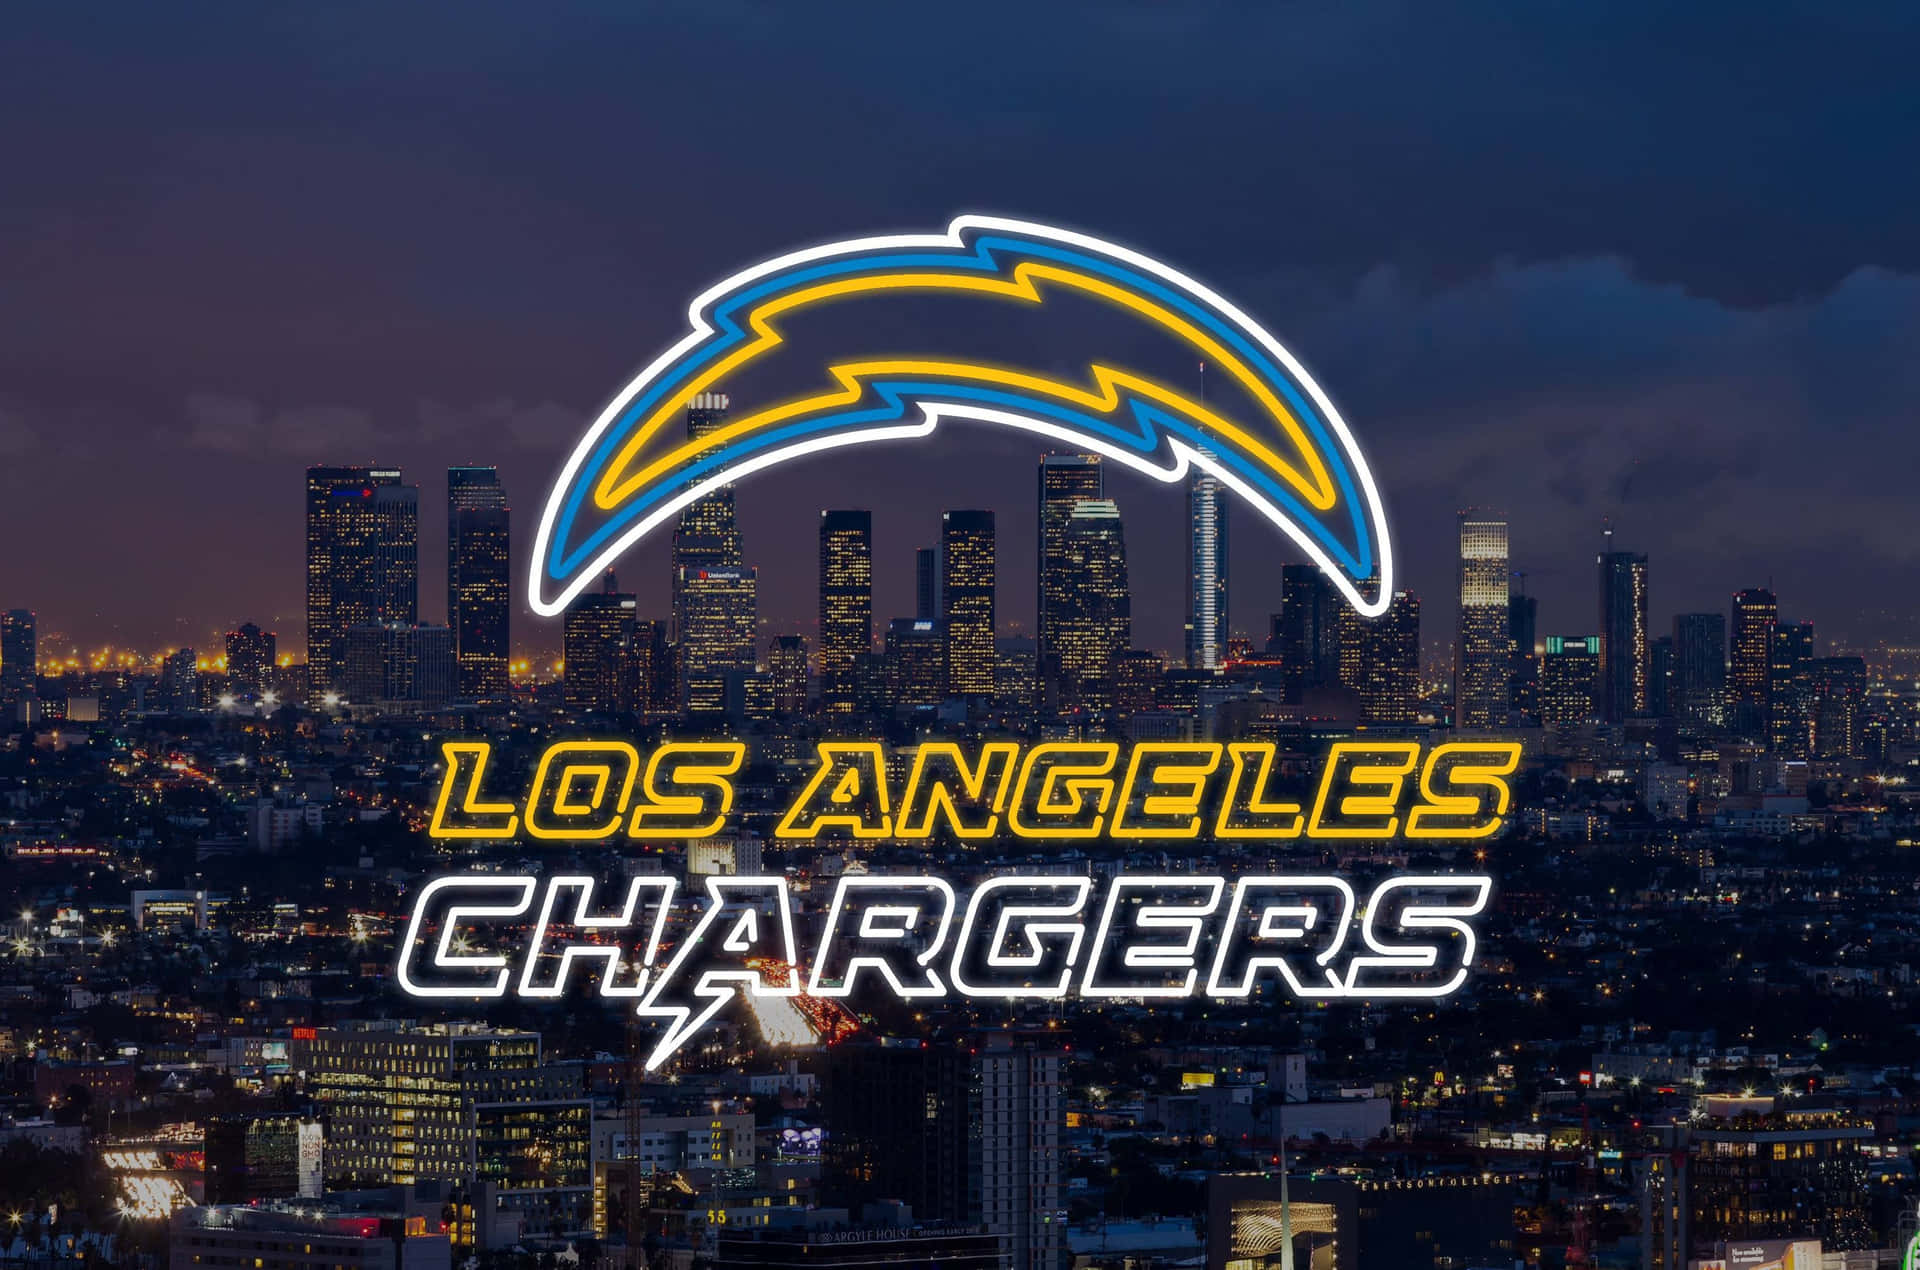 San Diego Chargers ready to charge into the next season Wallpaper